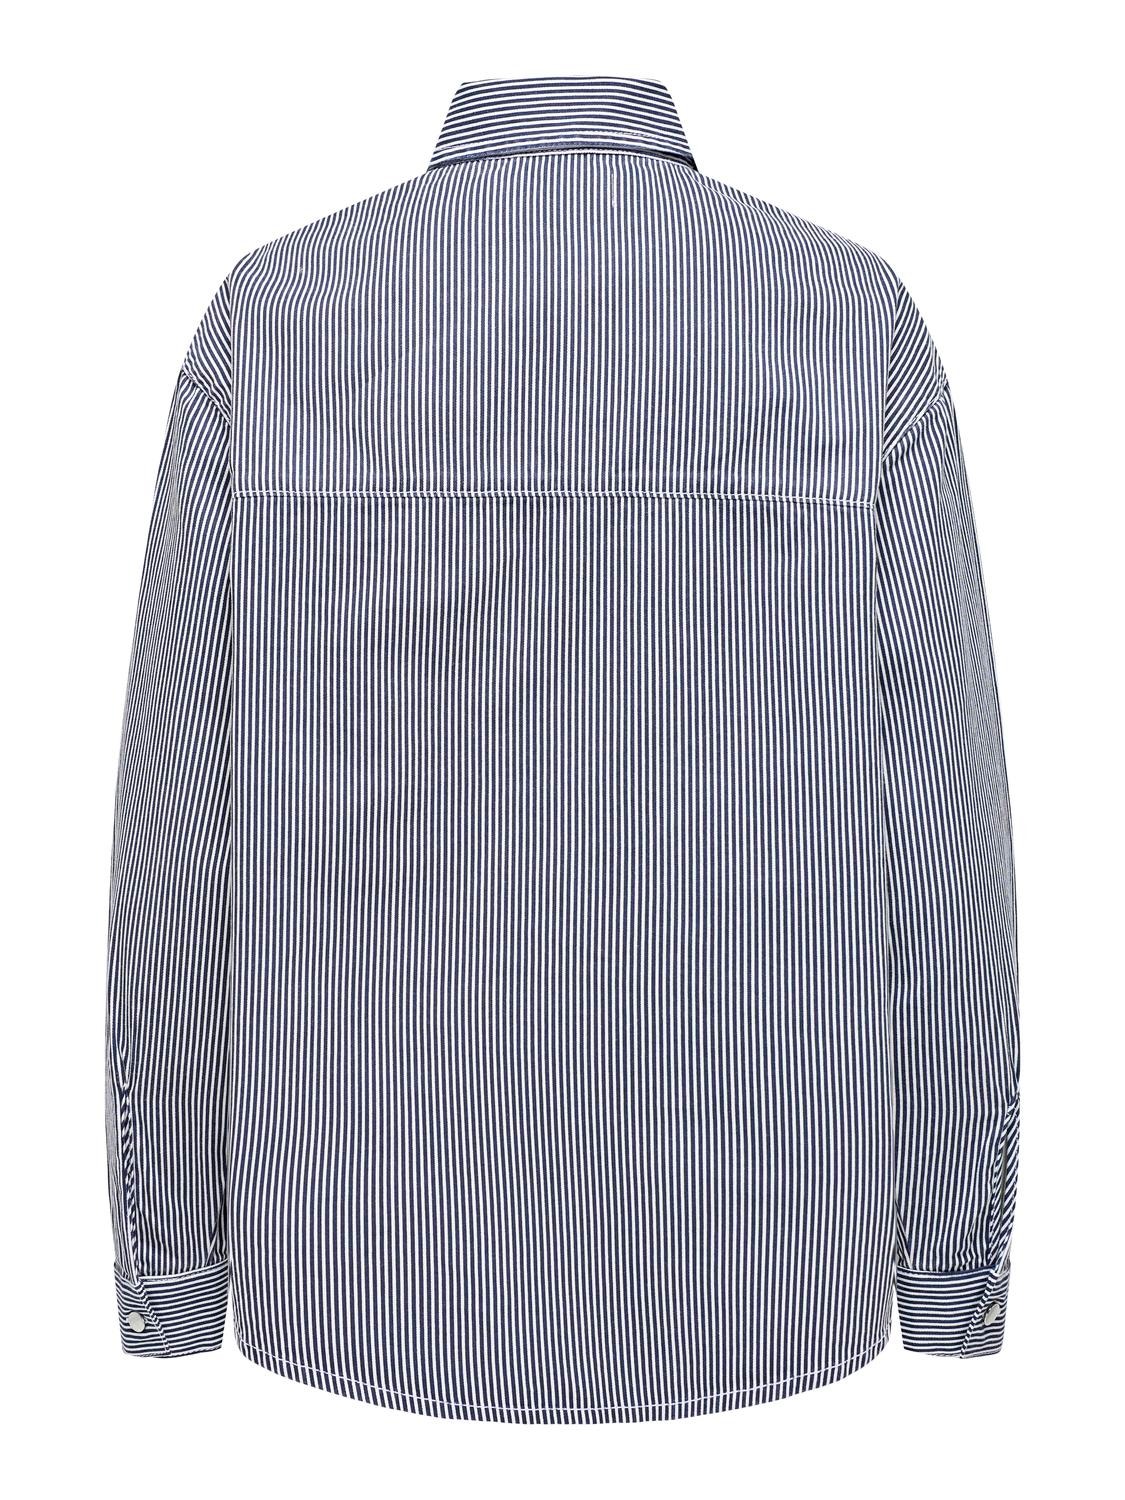 ONLY Striped shirt -Sky Captain - 15315026